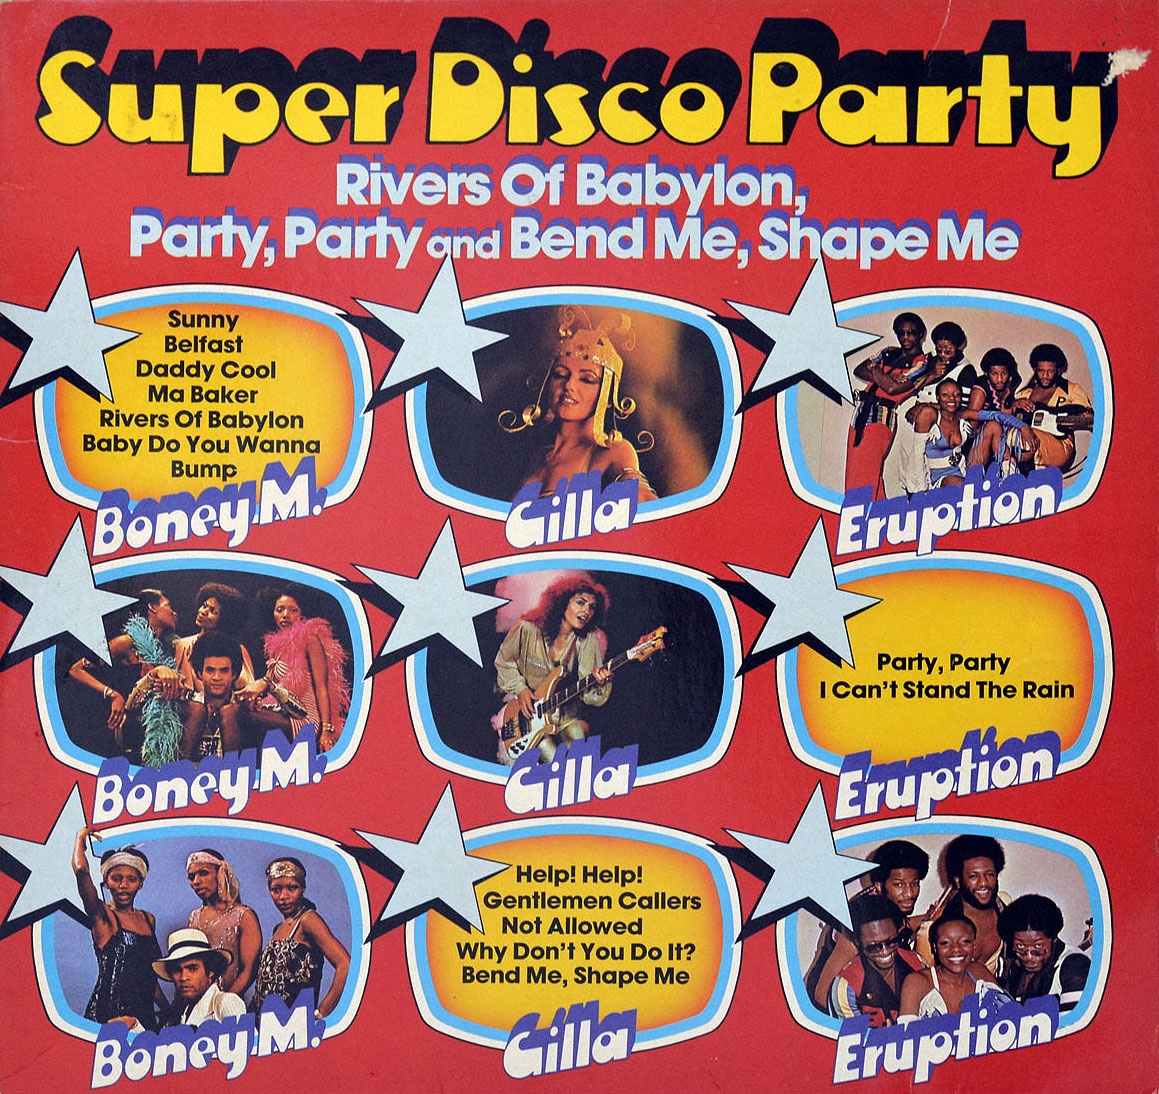 Album Front Cover Photo of VARIOUS ARTISTS - Super Disco Party with Boney M and Eruption 